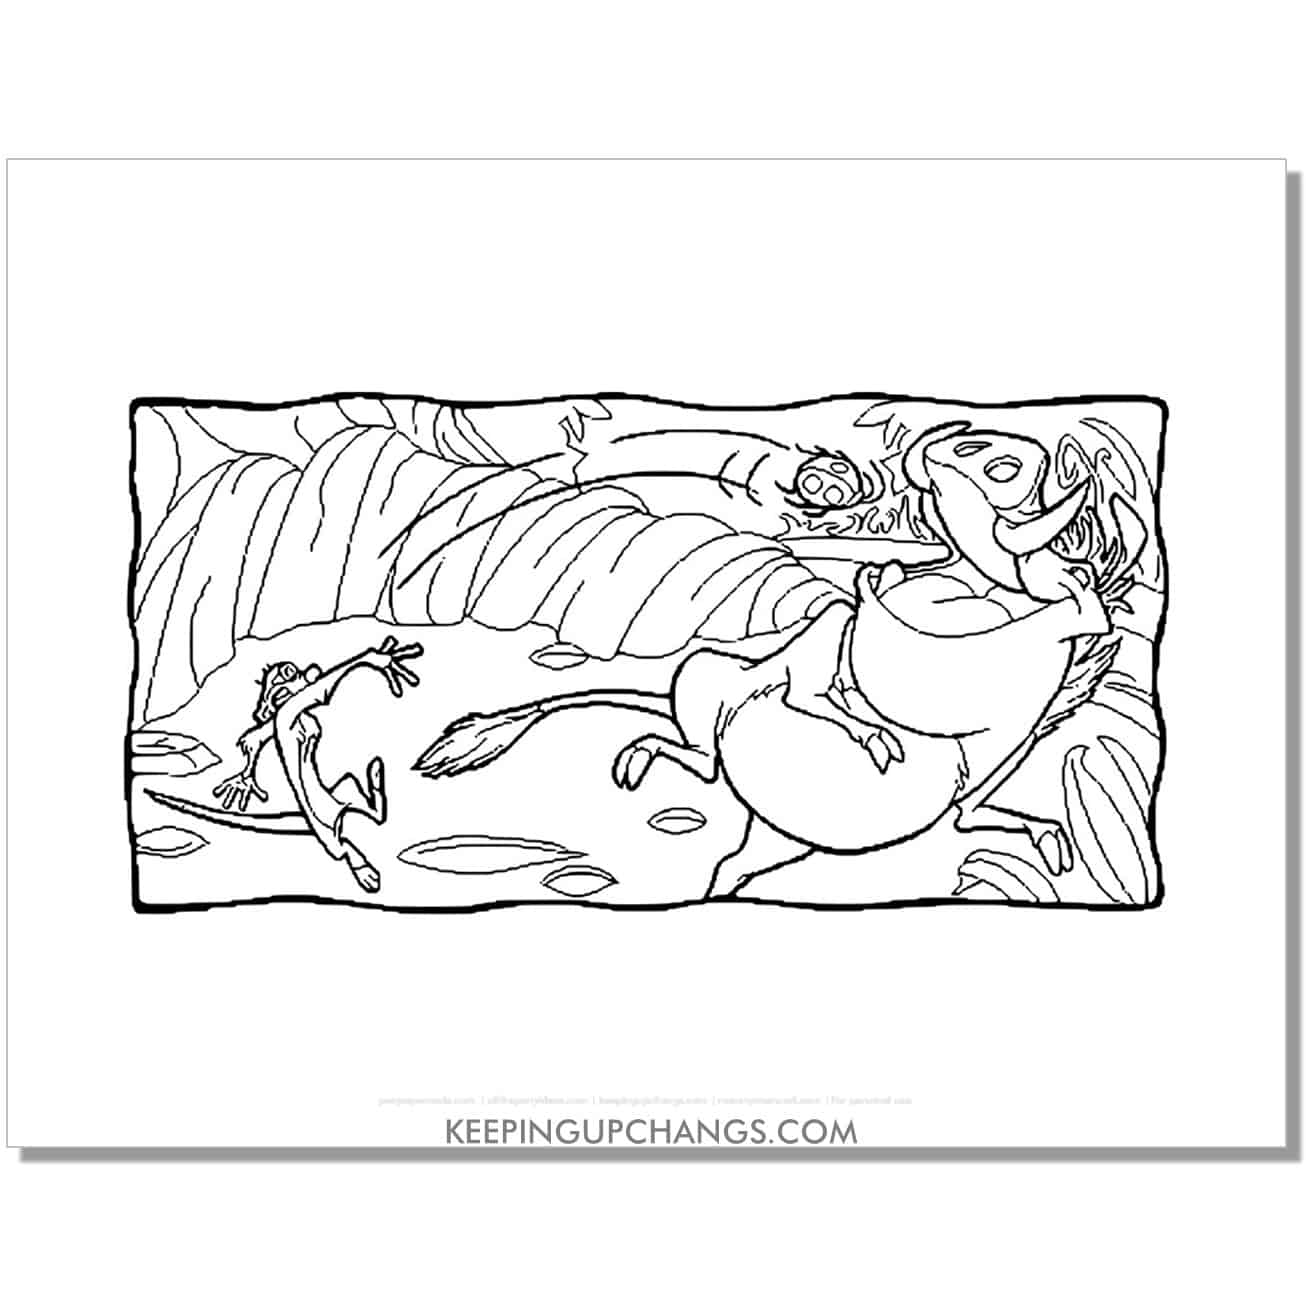 timon throws bug into pumbaa's mouth lion king coloring page, sheet.